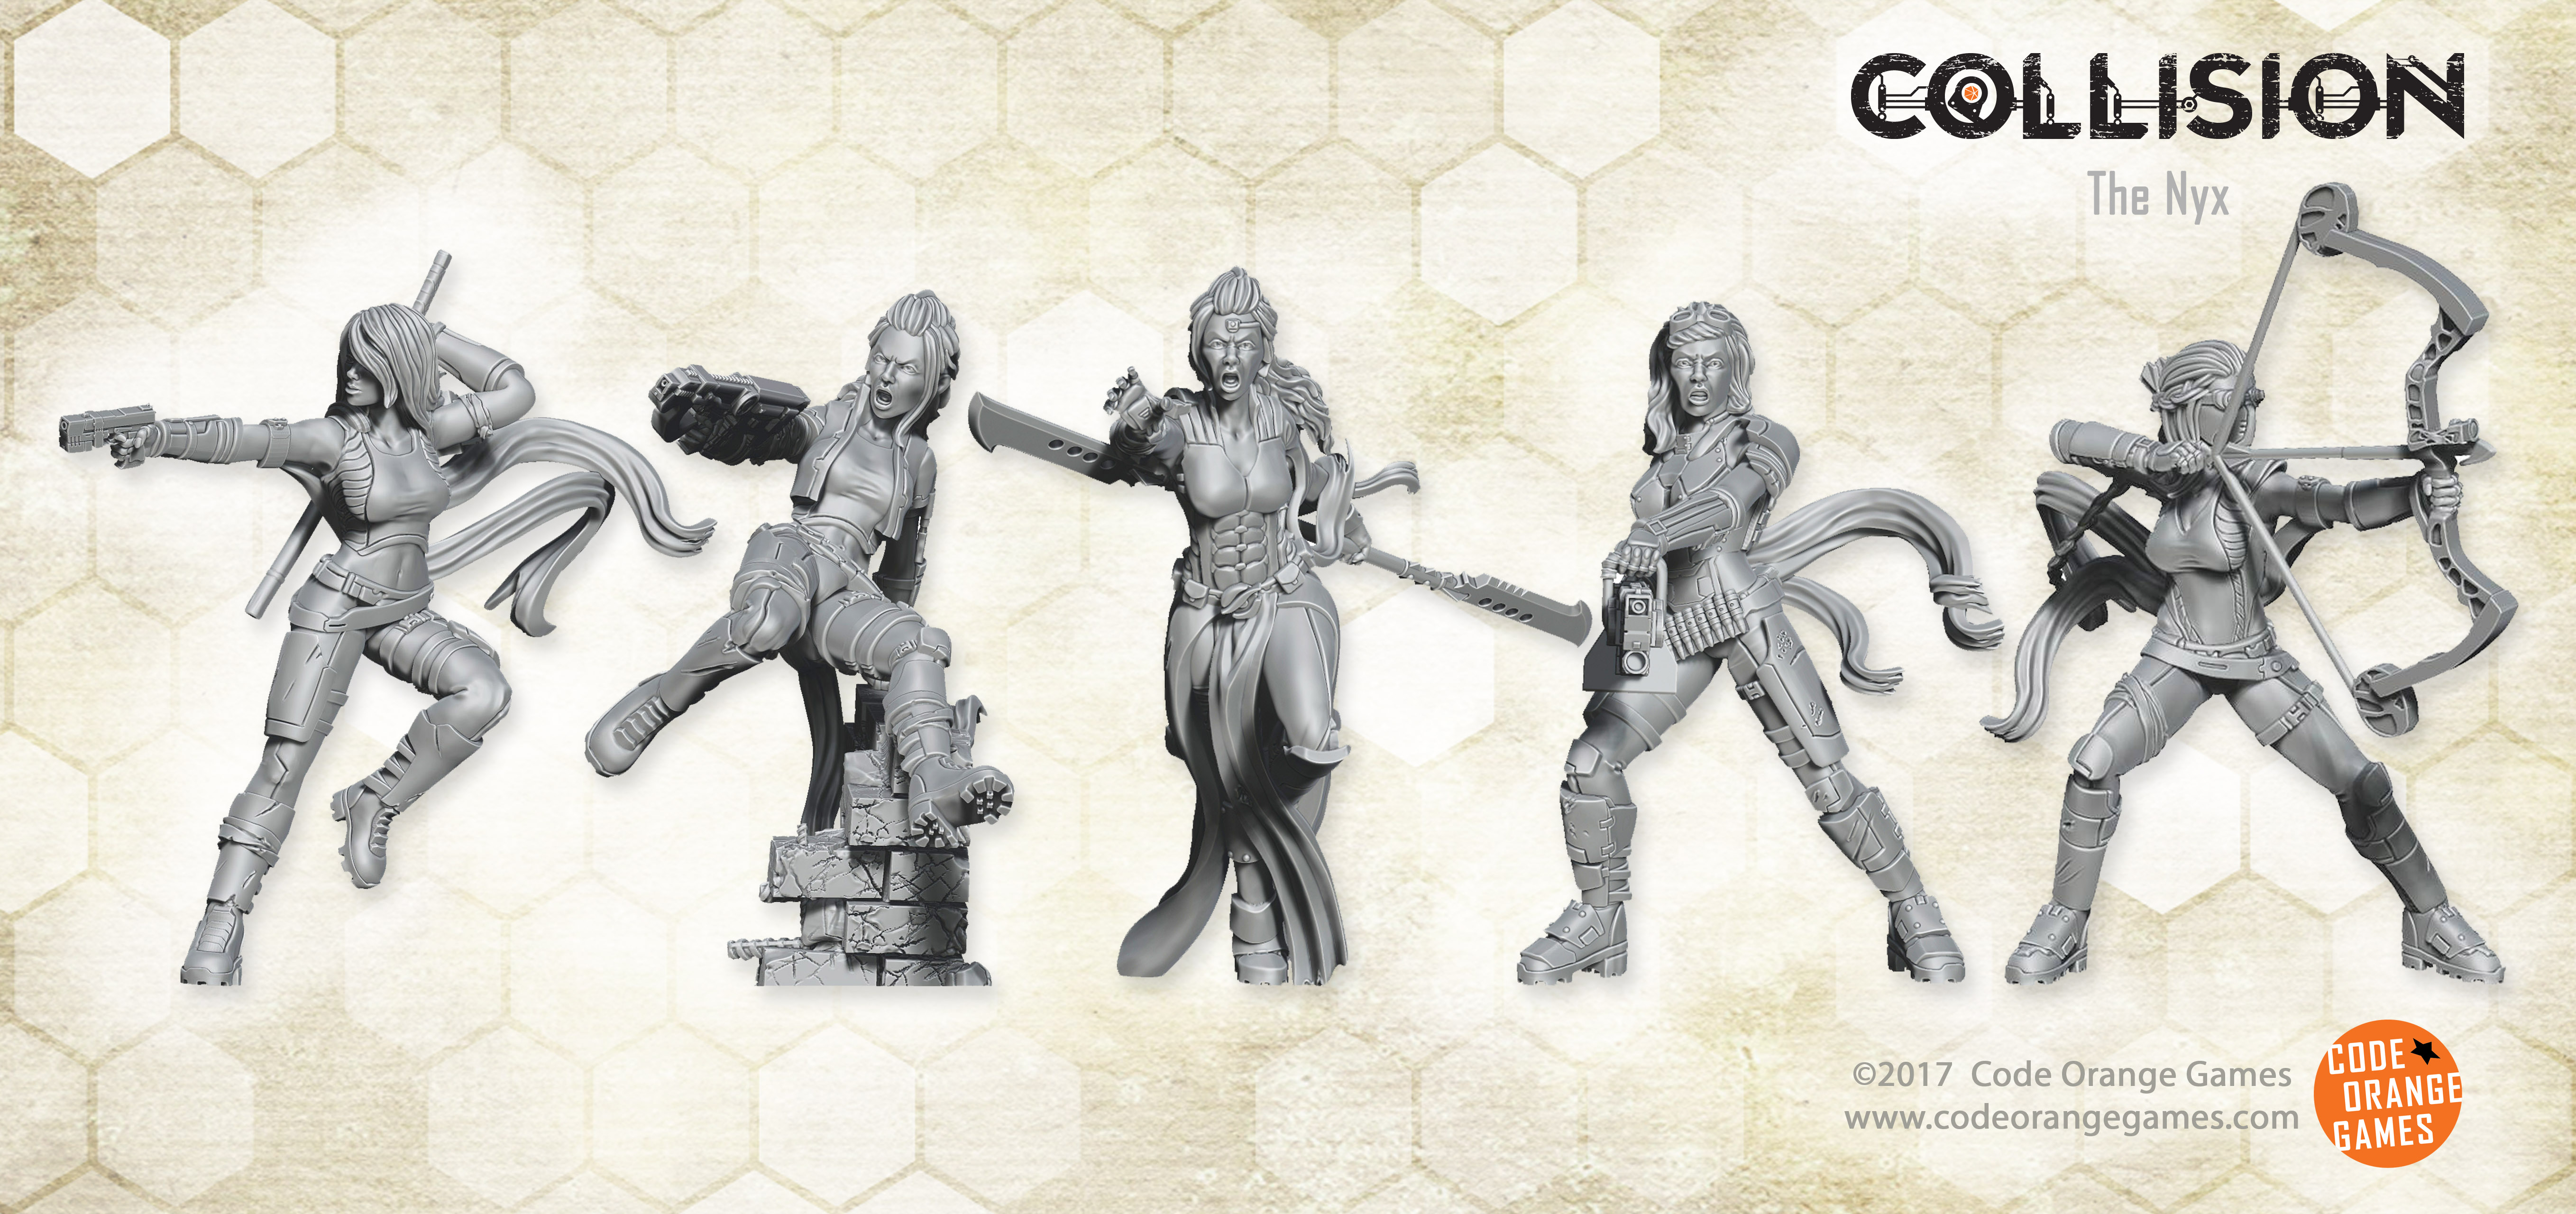 The Nyx are a group of fierce warrior woman who face the wastelands of the world of Collision.